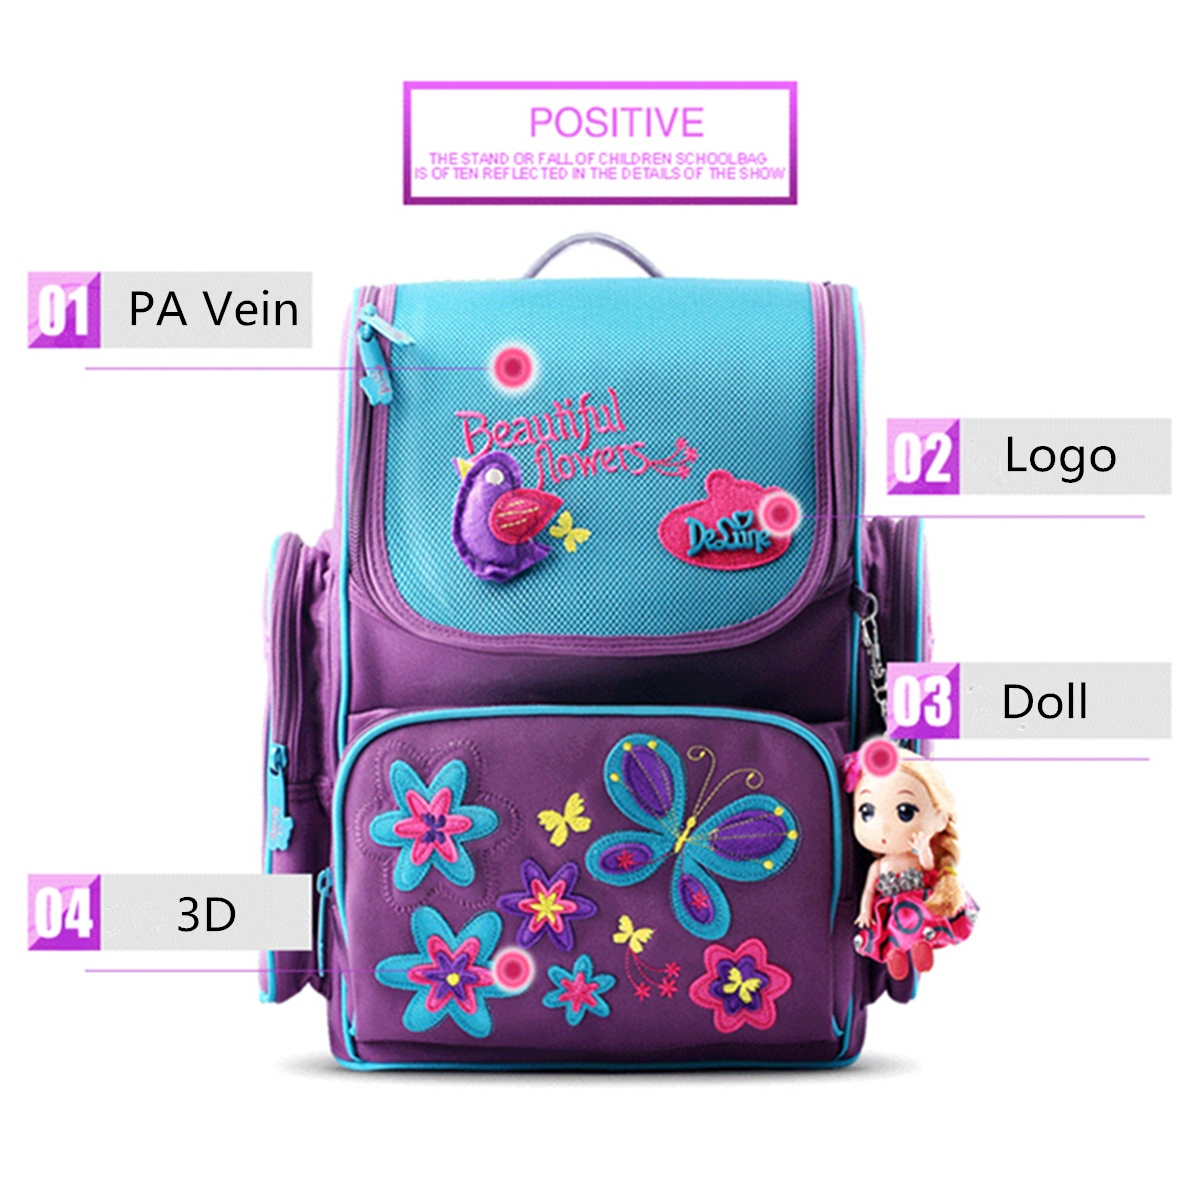 18L-Girls-Kids-Cartoon-School-Bag-Reflective-Safety-Waterproof-Children-Backpack-With-Doll-Pendant-1352202-4